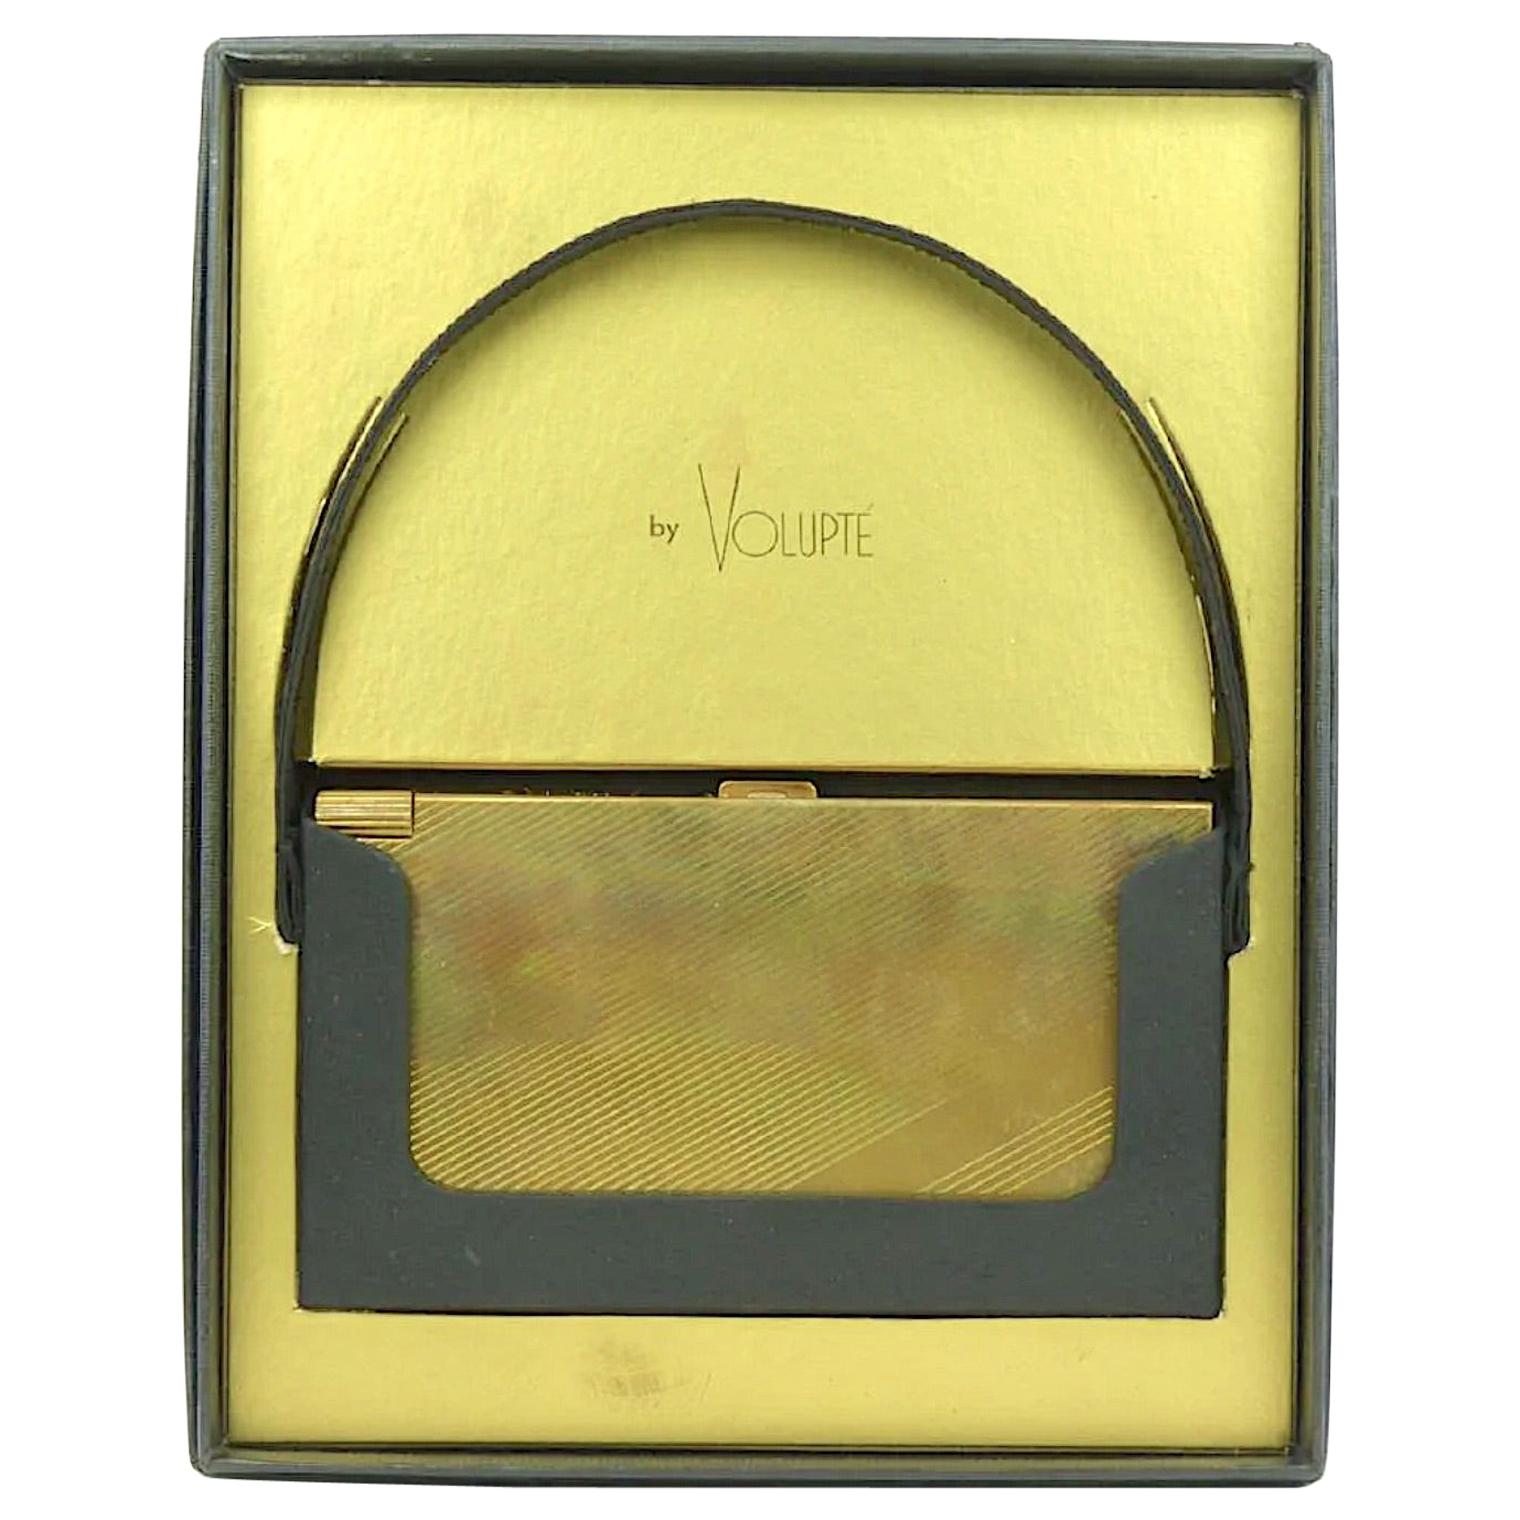 Volupte Gold Complete Compact Music Box in Original Box and Carrier-c. 1940 For Sale